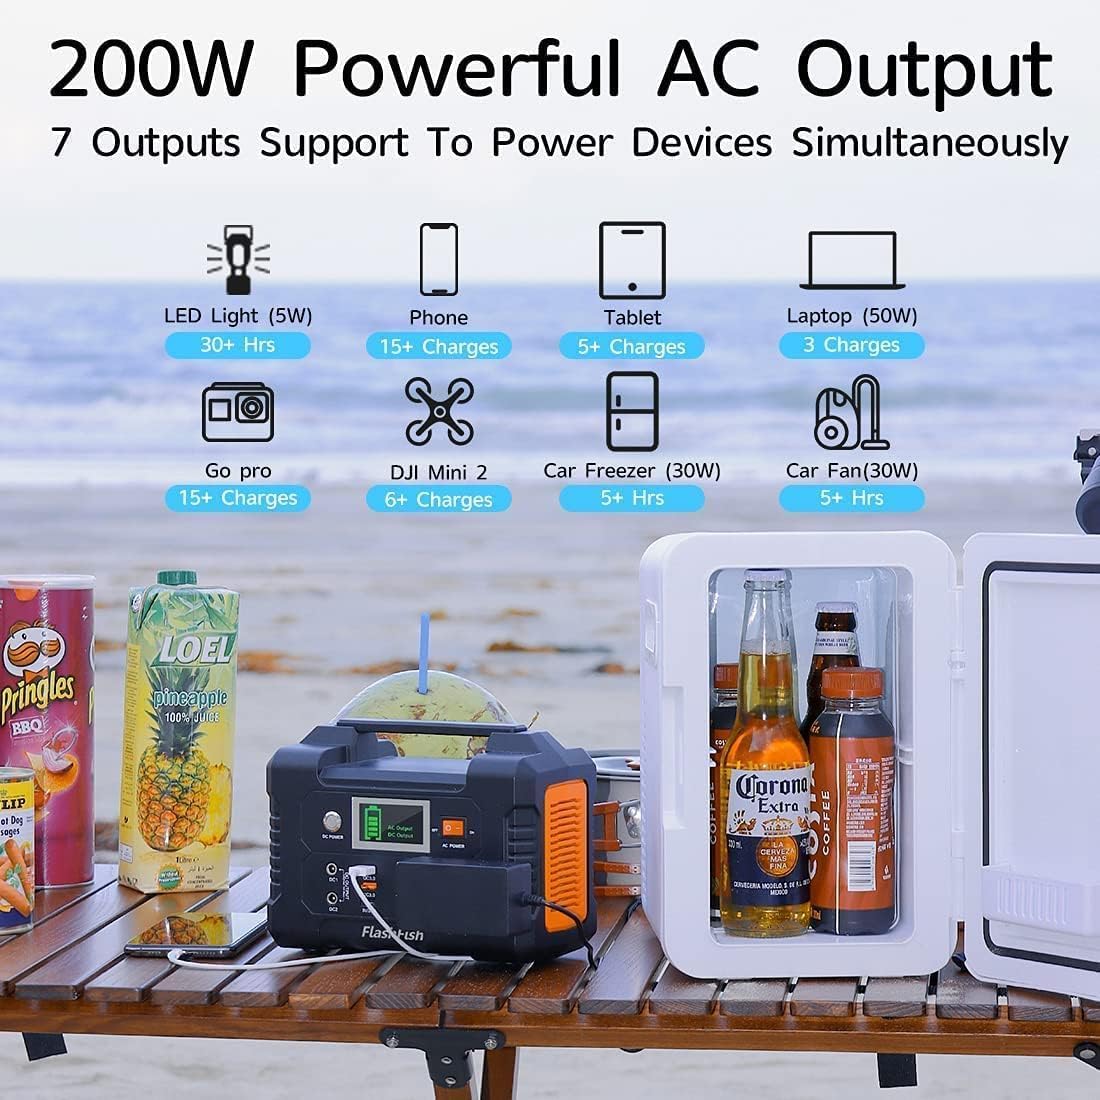 200W Portable Power Station, FlashFish 40800mAh Solar Generator With 110V AC Outlet/2 DC Ports/3 USB Ports, Backup Battery Pack Power Supply for CPAP Outdoor Advanture Load Trip Camping Emergency. - FlashFish 200W Portable Power Station Review